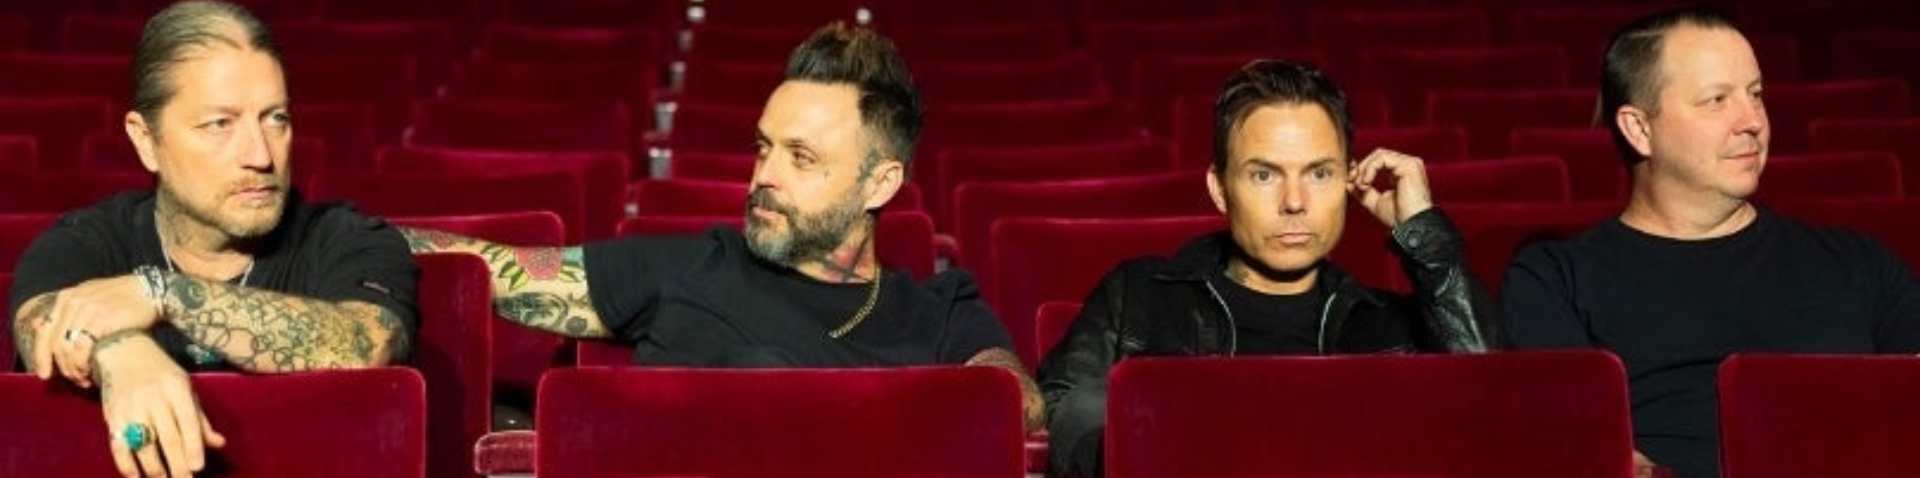 Blue October sitting in theatre seats